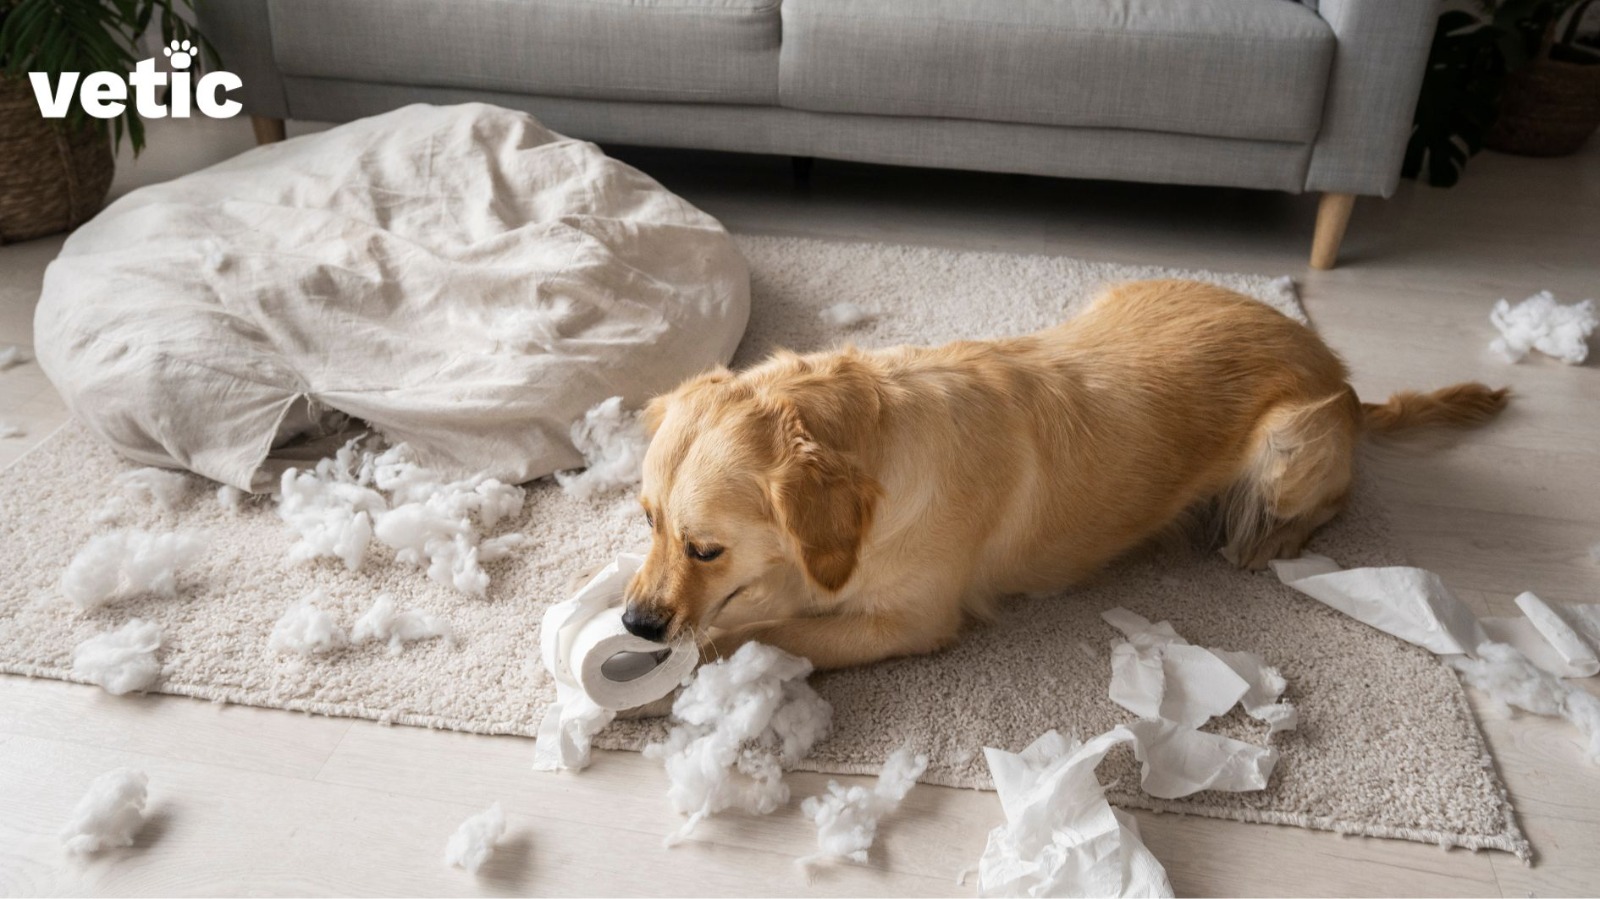 Golden retriever sitting on a beige rug with a torn up cushion by his side, cotton stuffing and toilet paper flying all around him. Leaving dogs alone can result in zoomies, chewing and destructive behaviour.